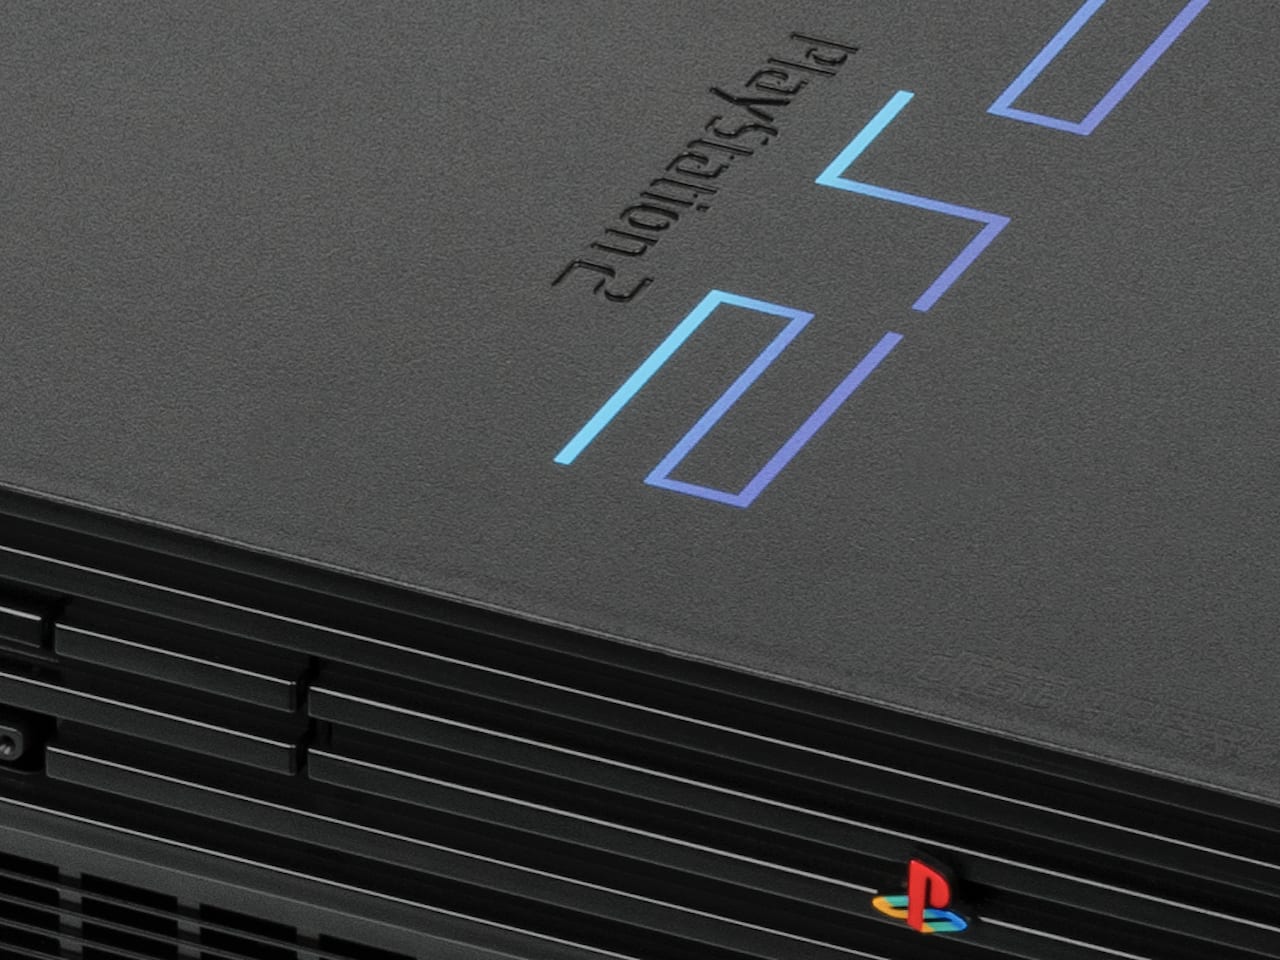 PS2 games: The 10 you need to play